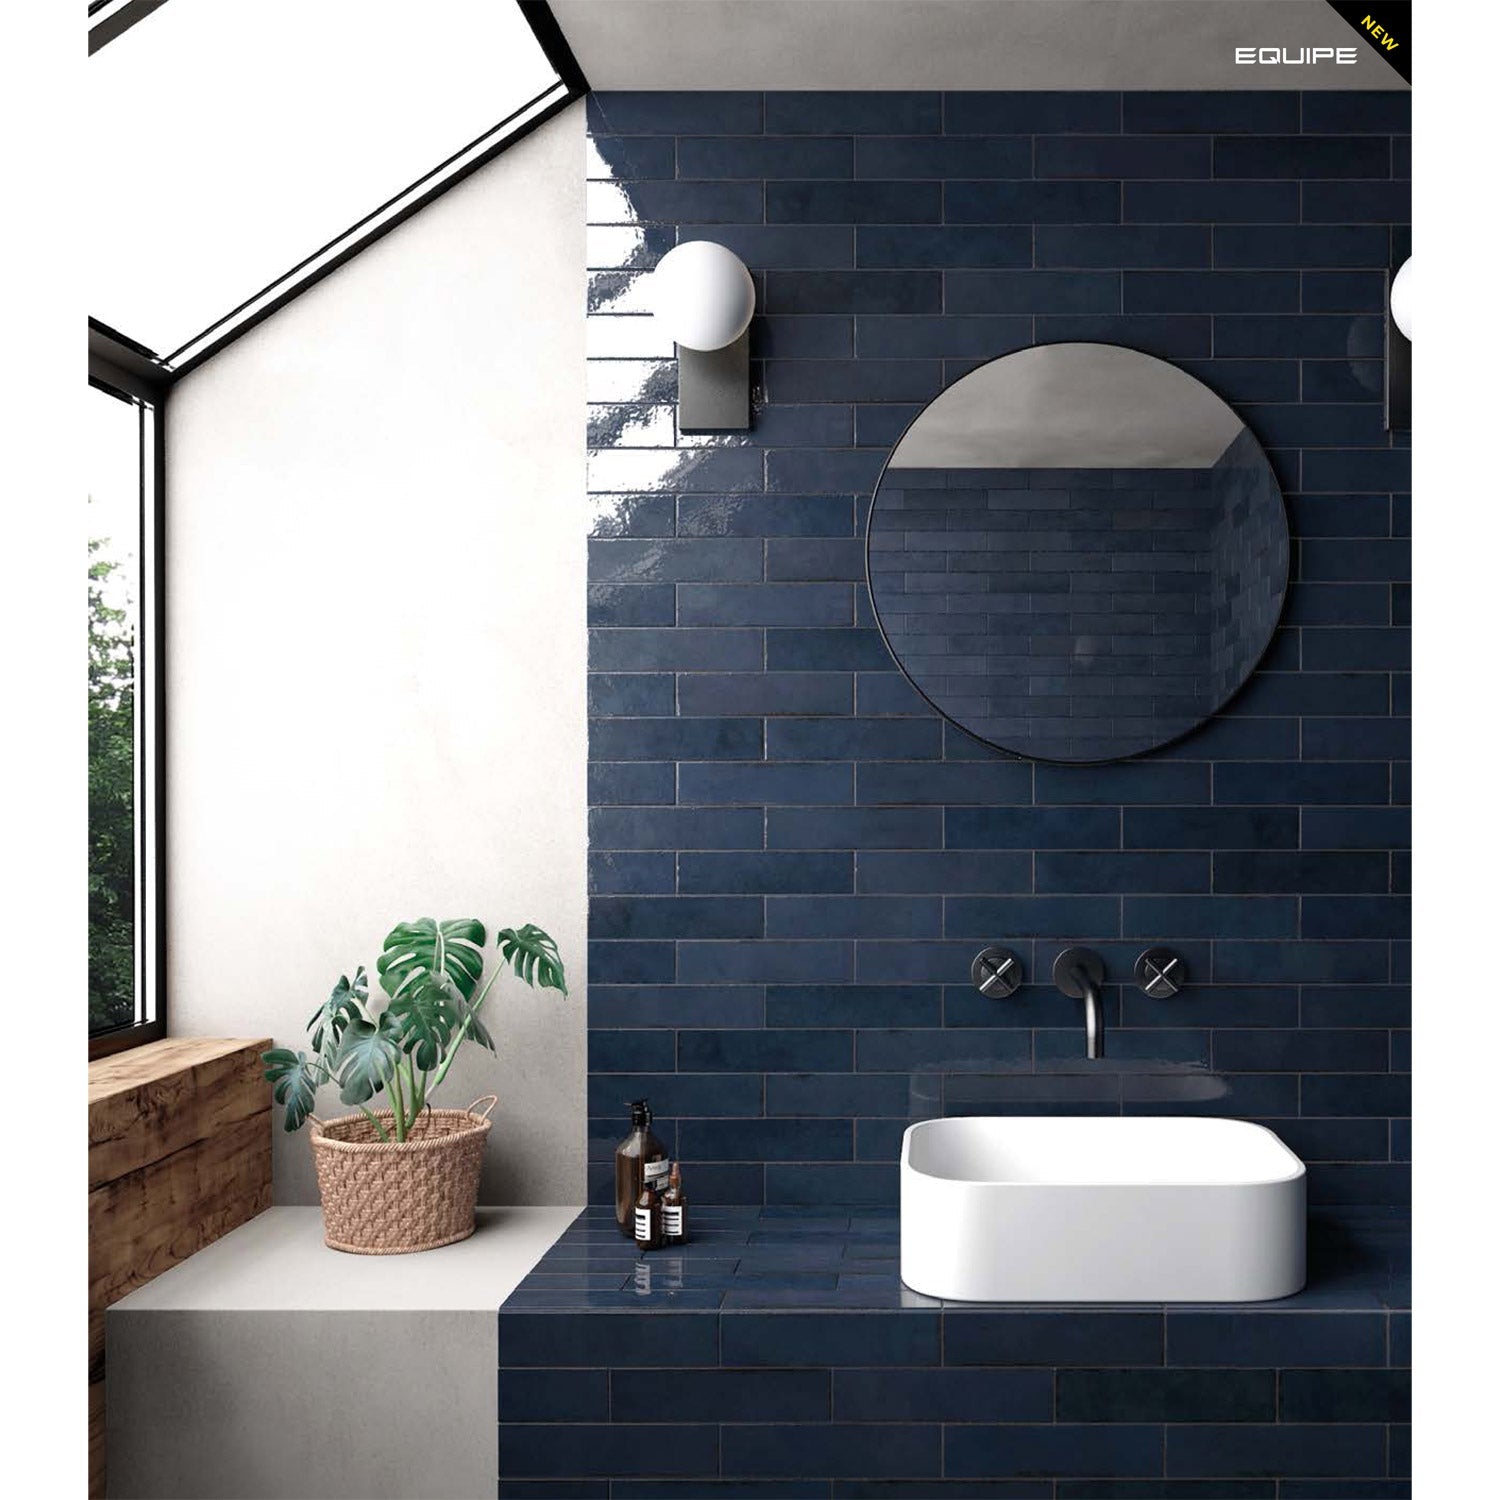 Equipe - Tribeca Collection - 2.5 in. x 10 in. Wall Tile - Blue Note